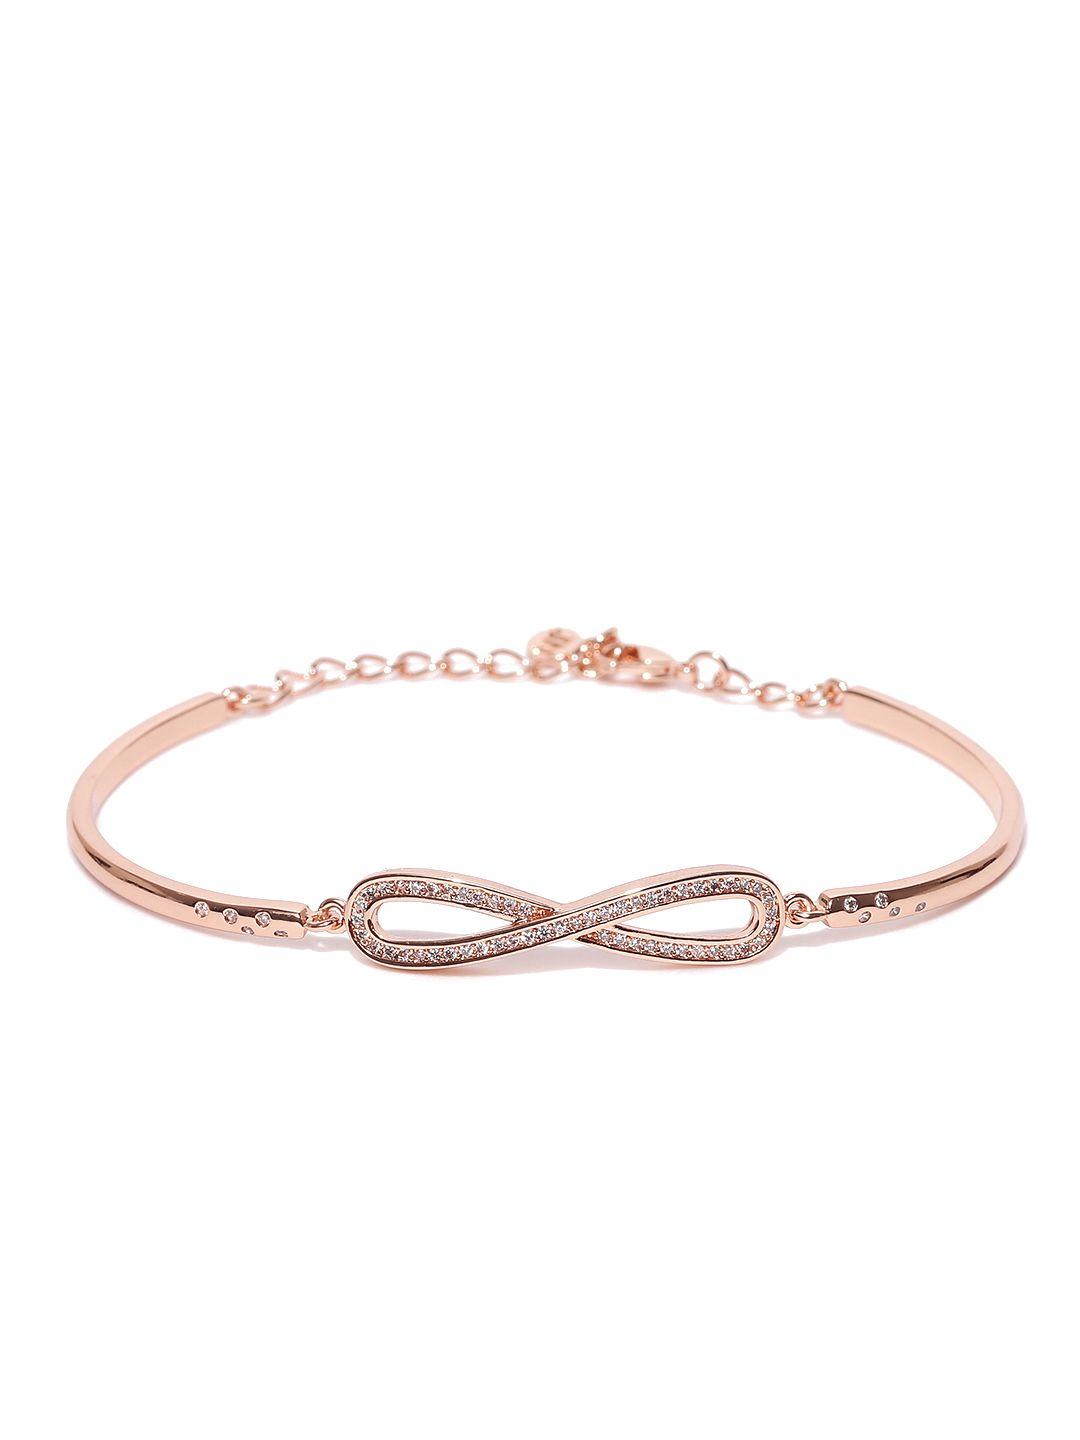 jewels galaxy 18k rose gold-plated handcrafted bracelet